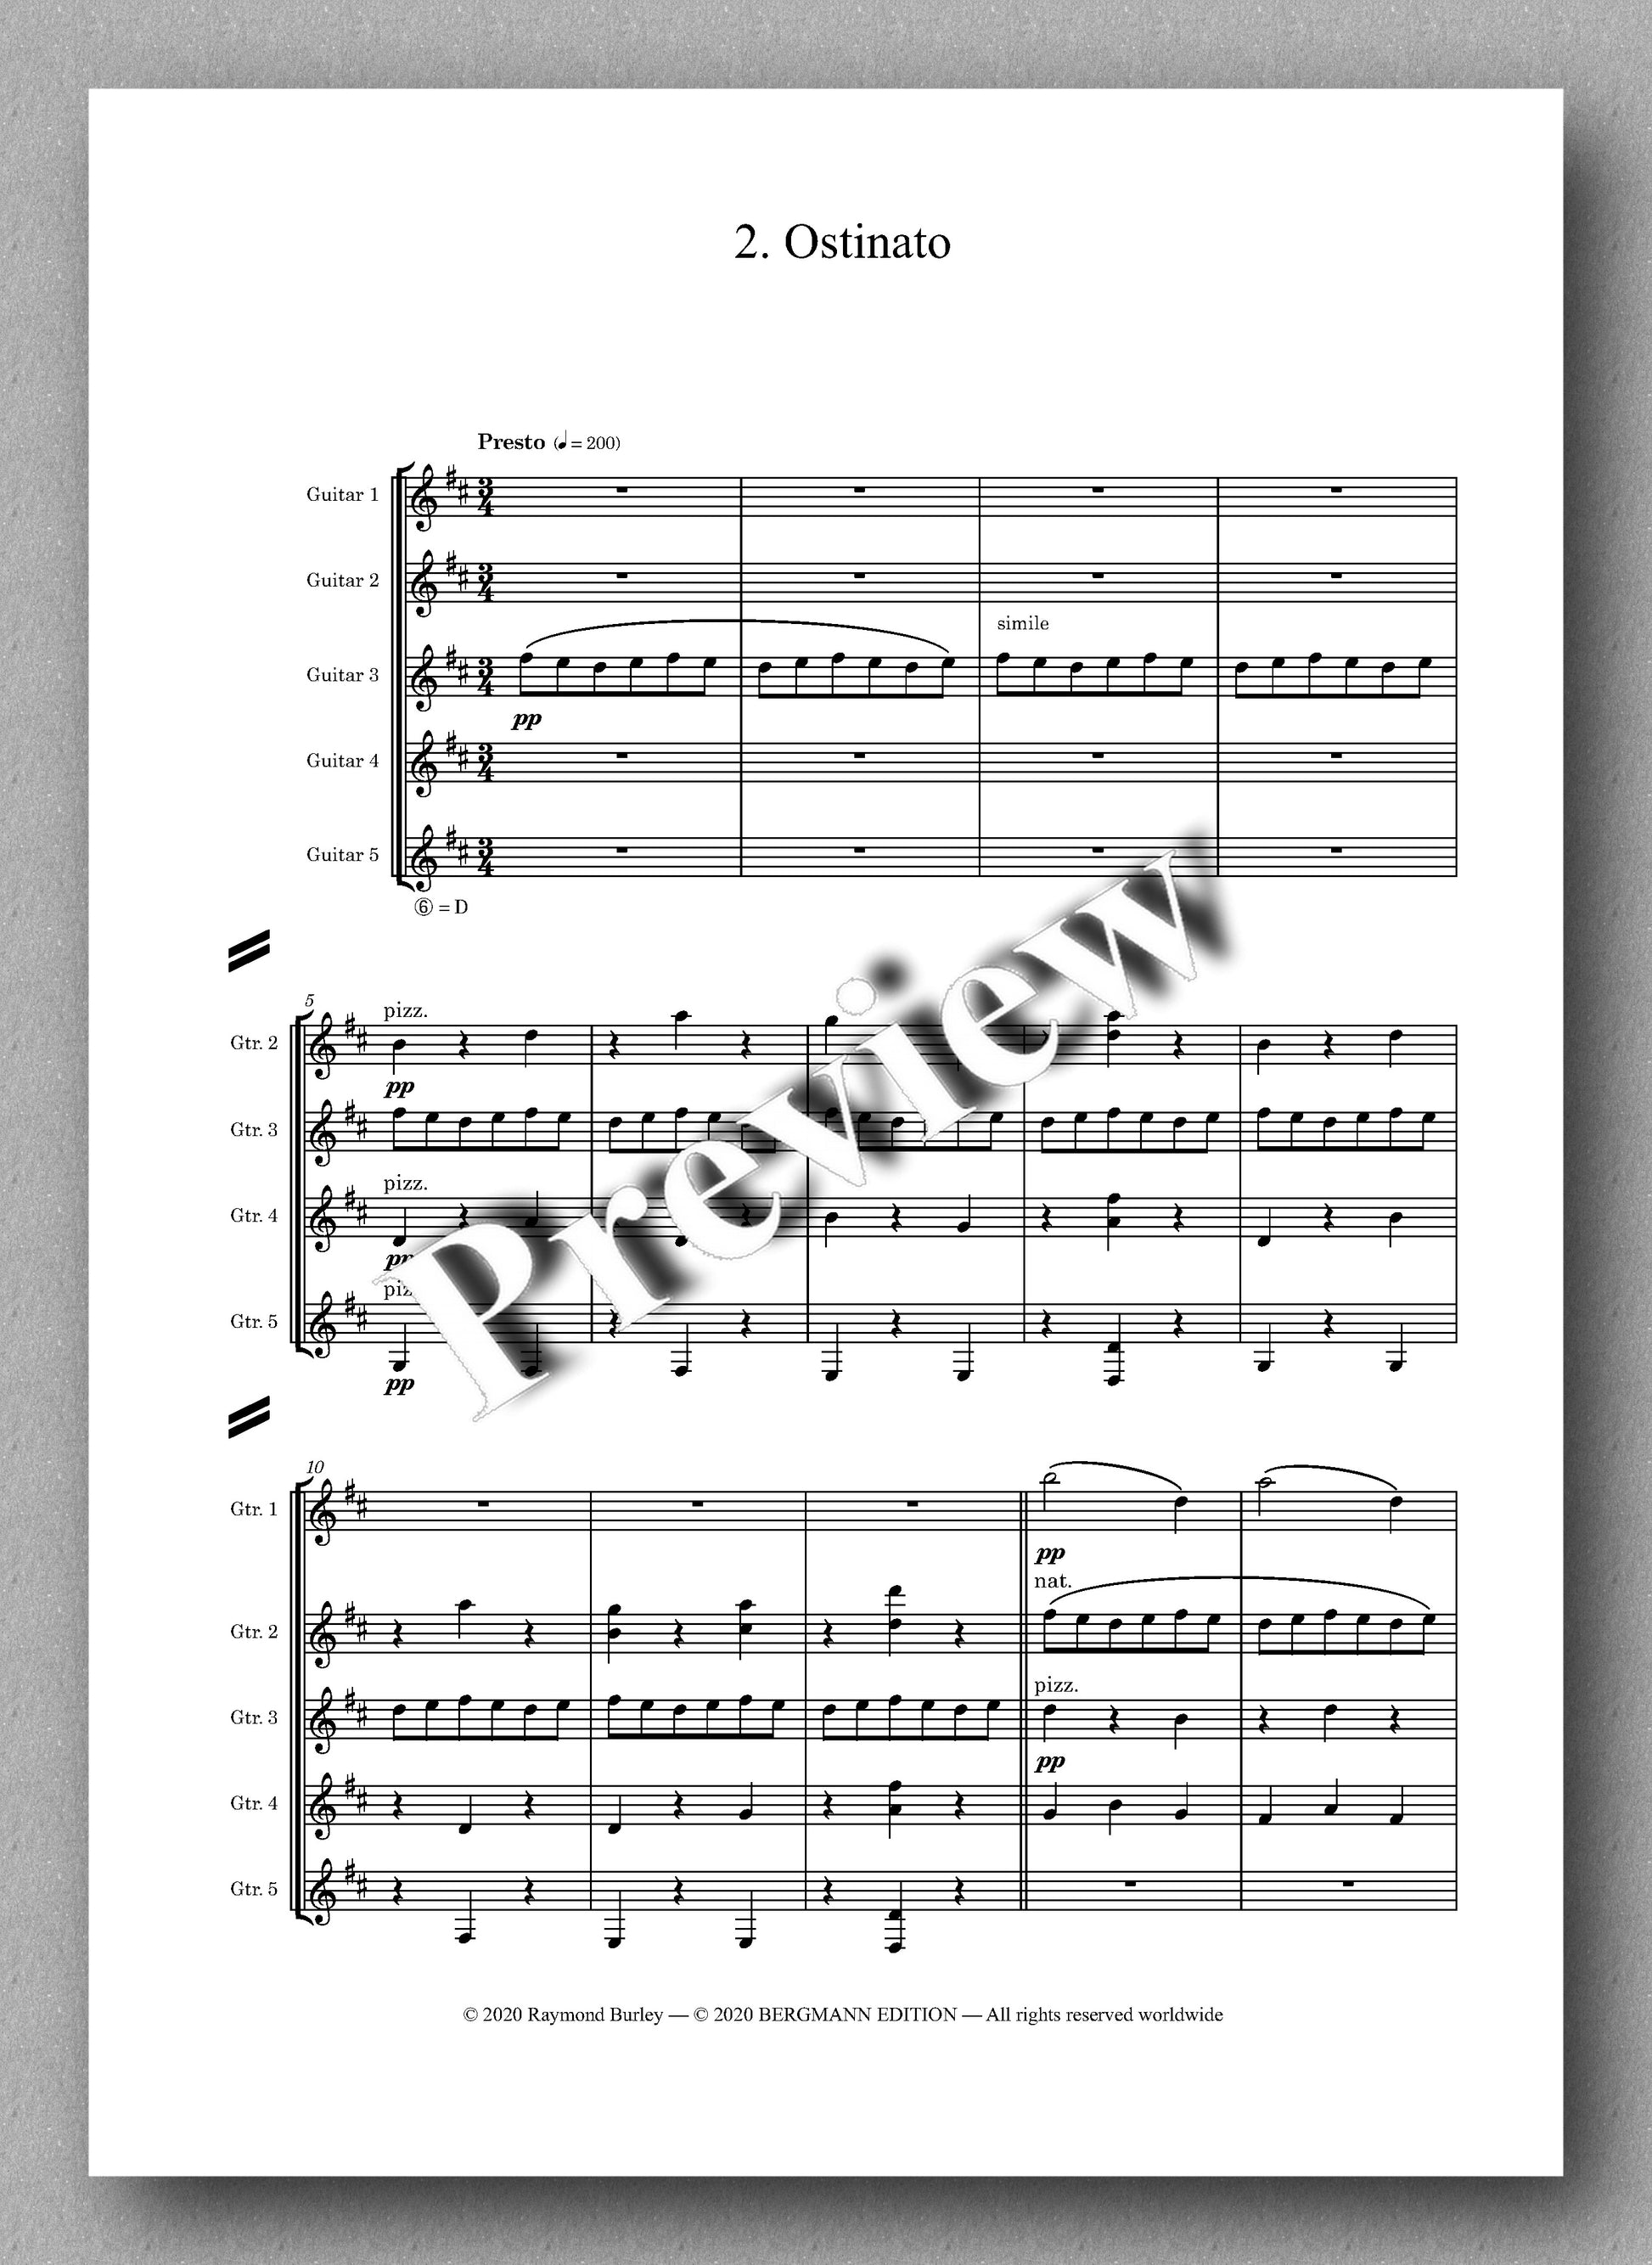 Gustav Holst, St. Paul’s Suite, Op. 29, no. 2  - preview of the Music score 2